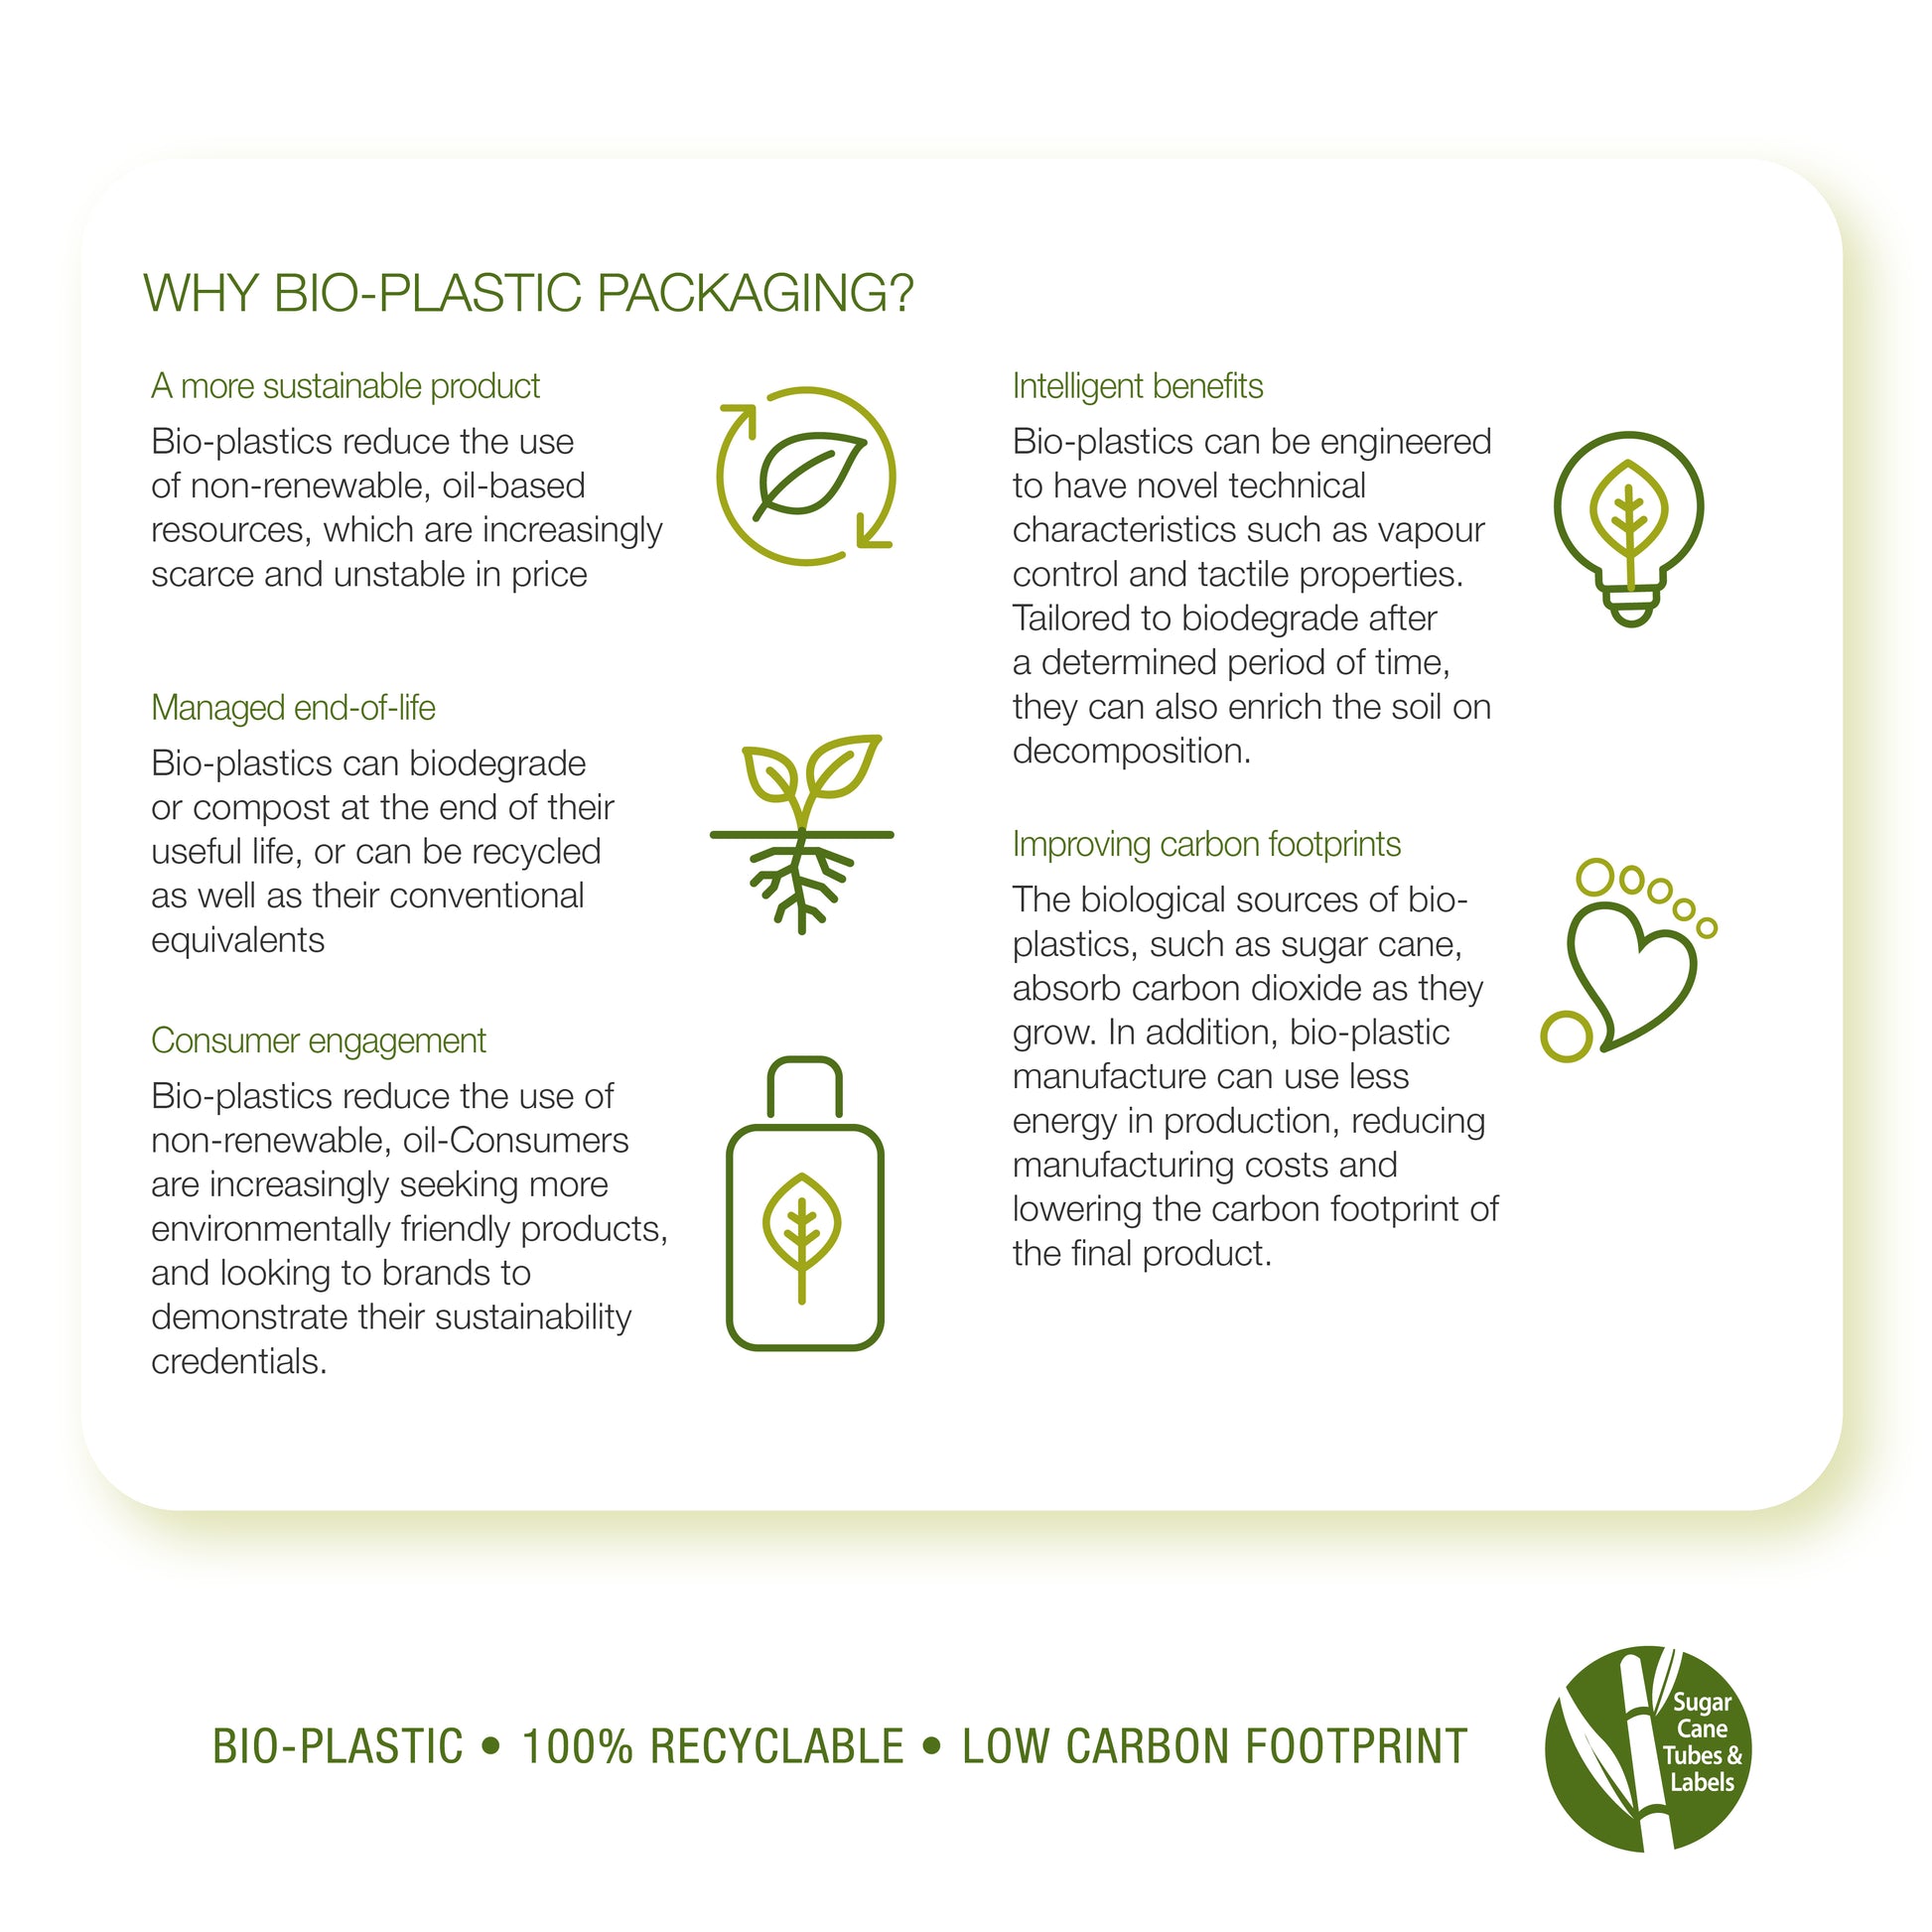 Environmentally friendly bio-plastics is a more sustainable product reducing the use of non-renewable, oil-based resources, which are increasingly scarce and unstable in price